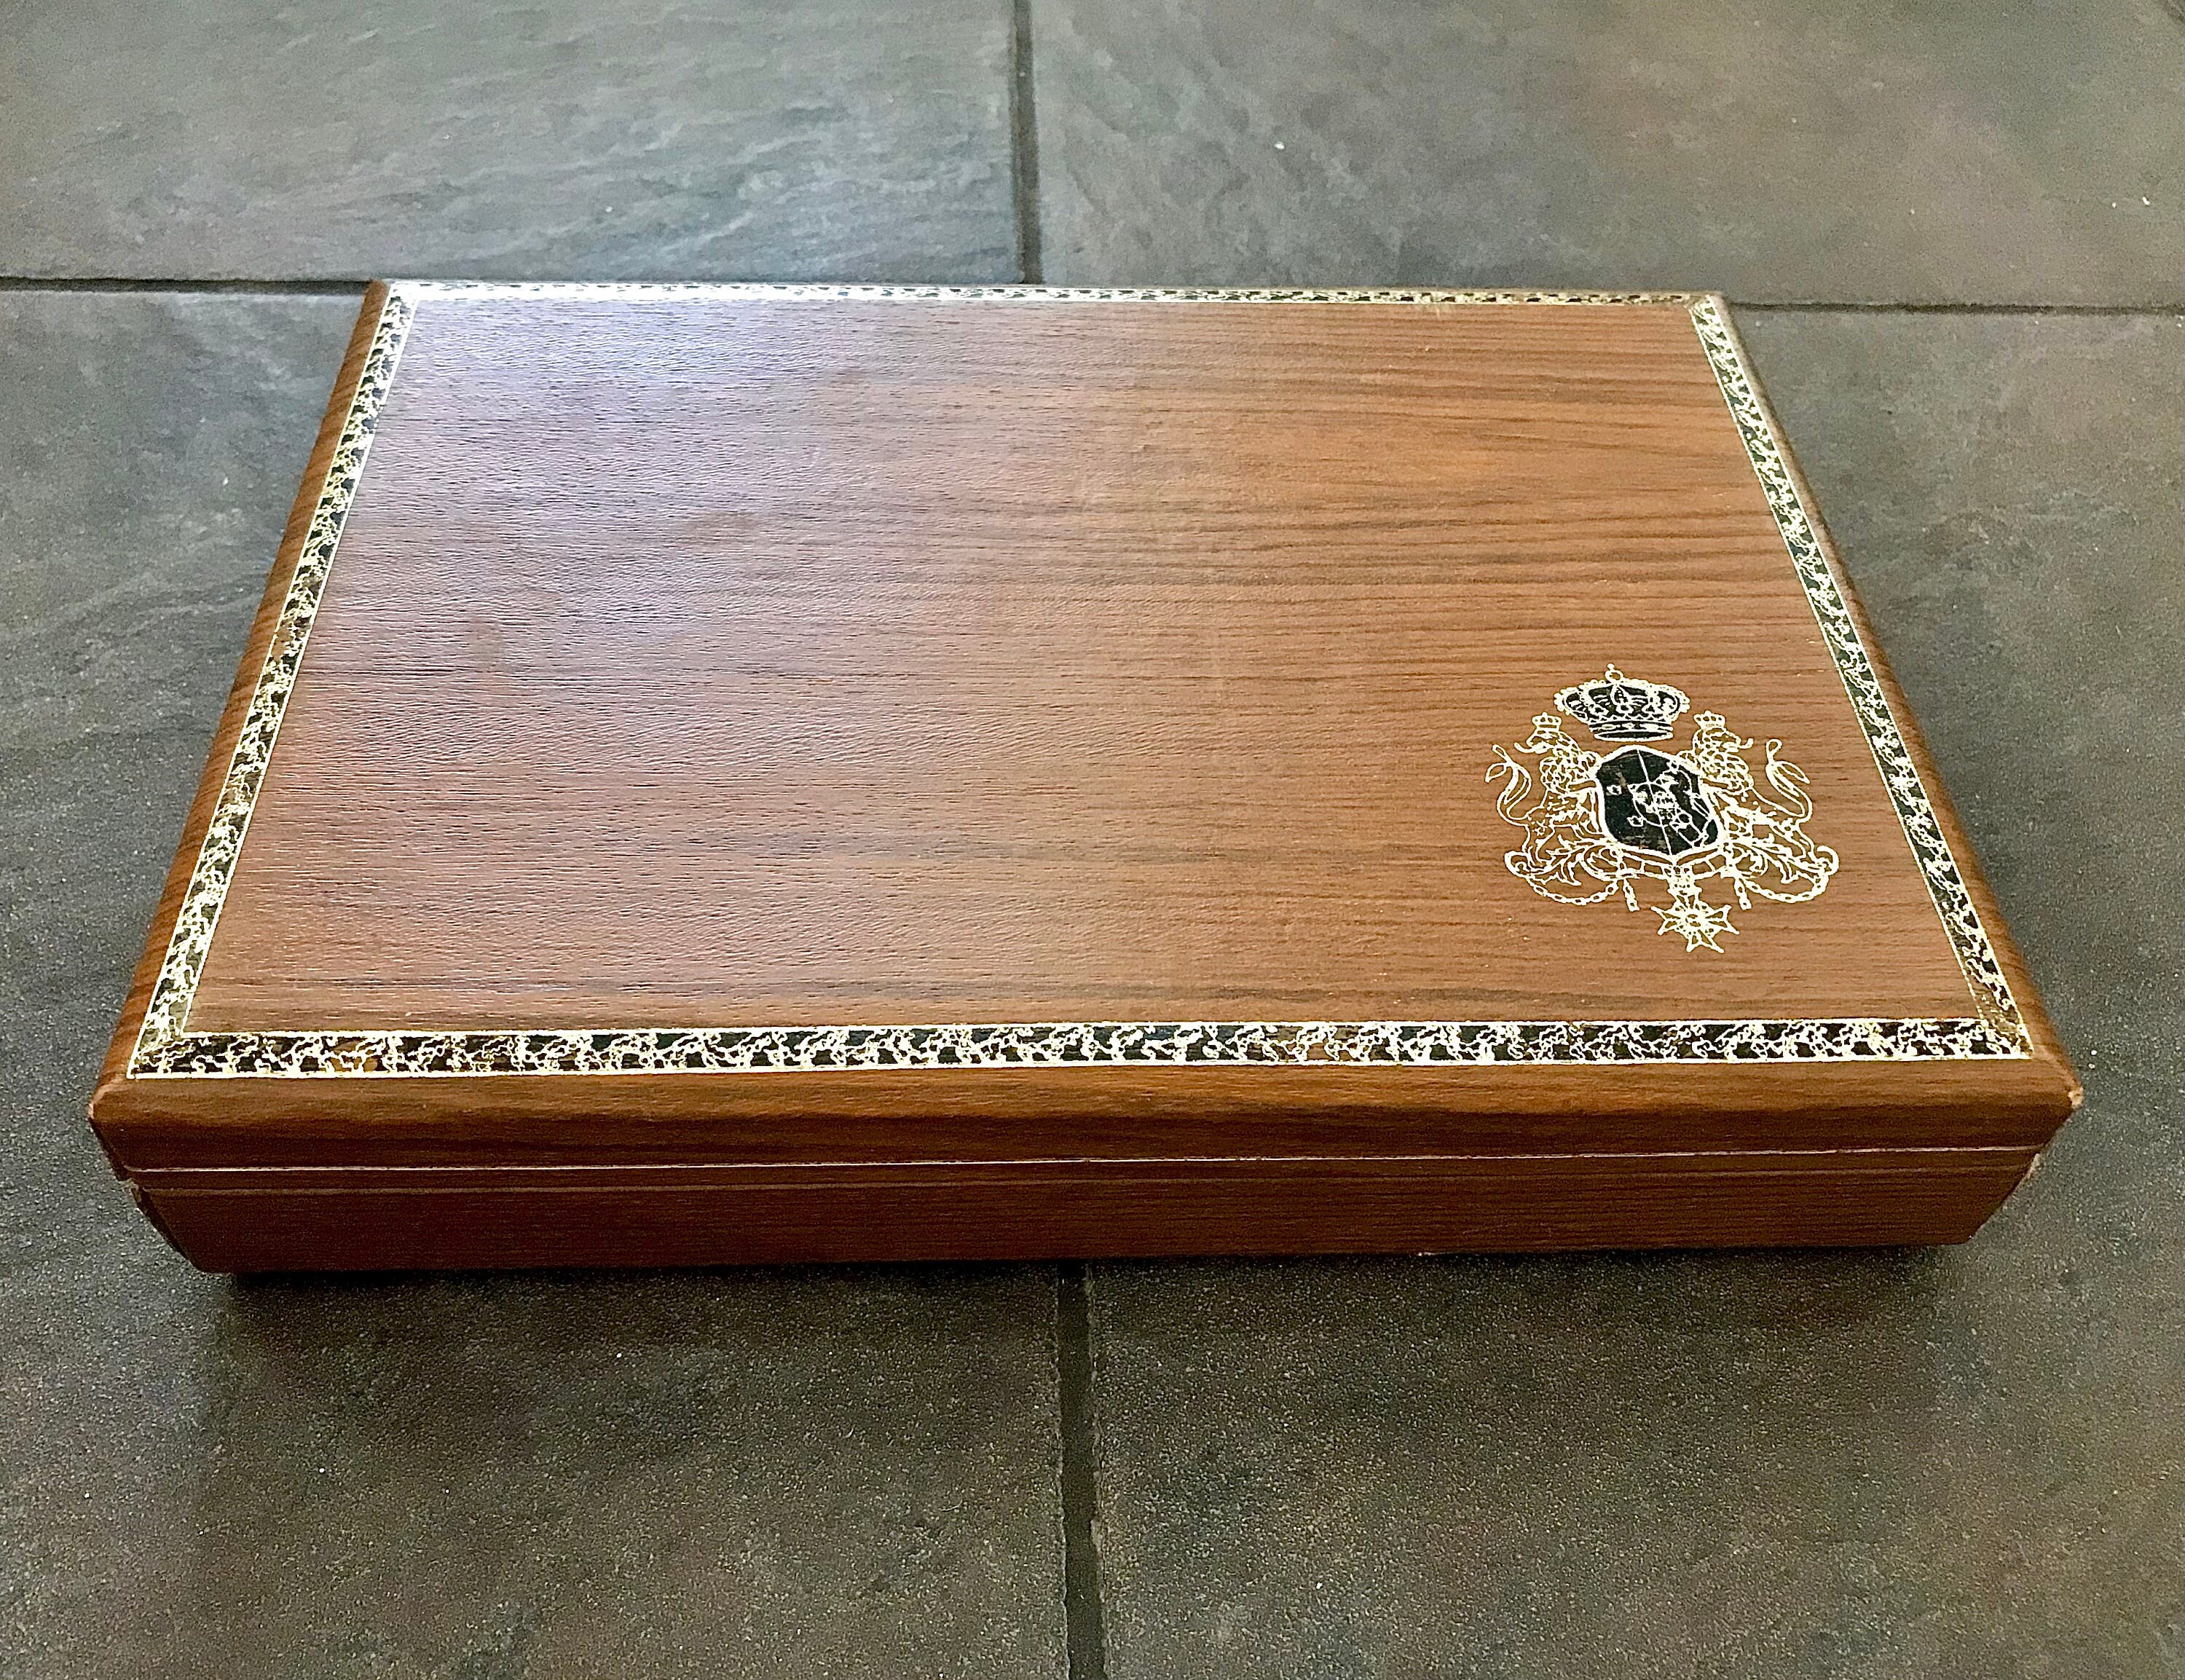 Vintage Swank Jewelry Box "Designer Philippe" Made in Sweden  Expressly for SWANK